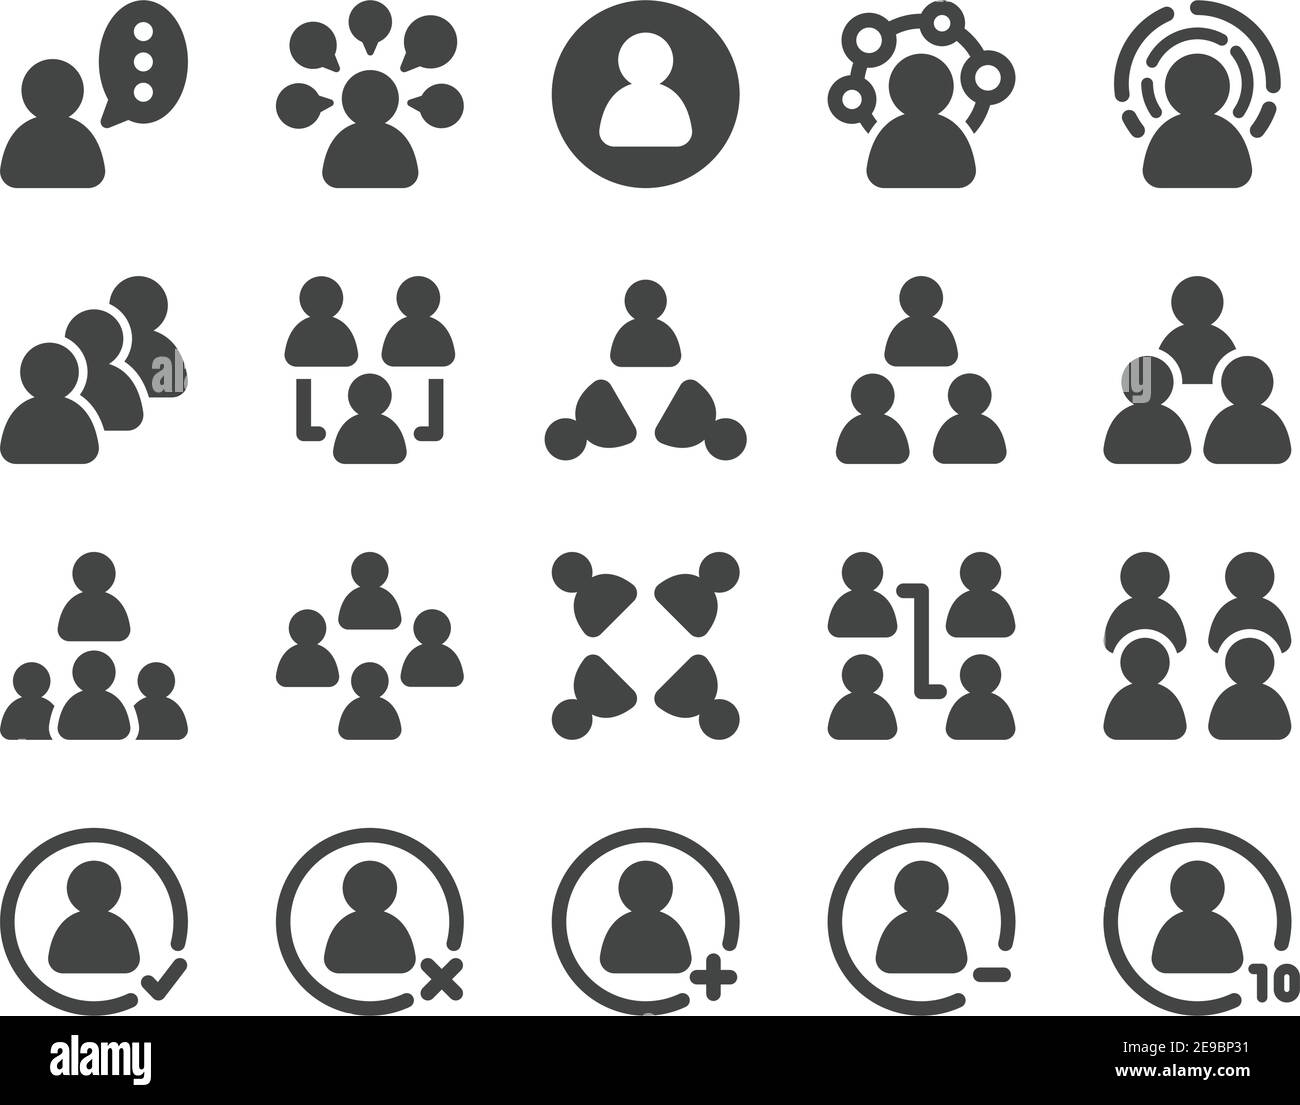 person and people icon set,vector and illustration Stock Vector